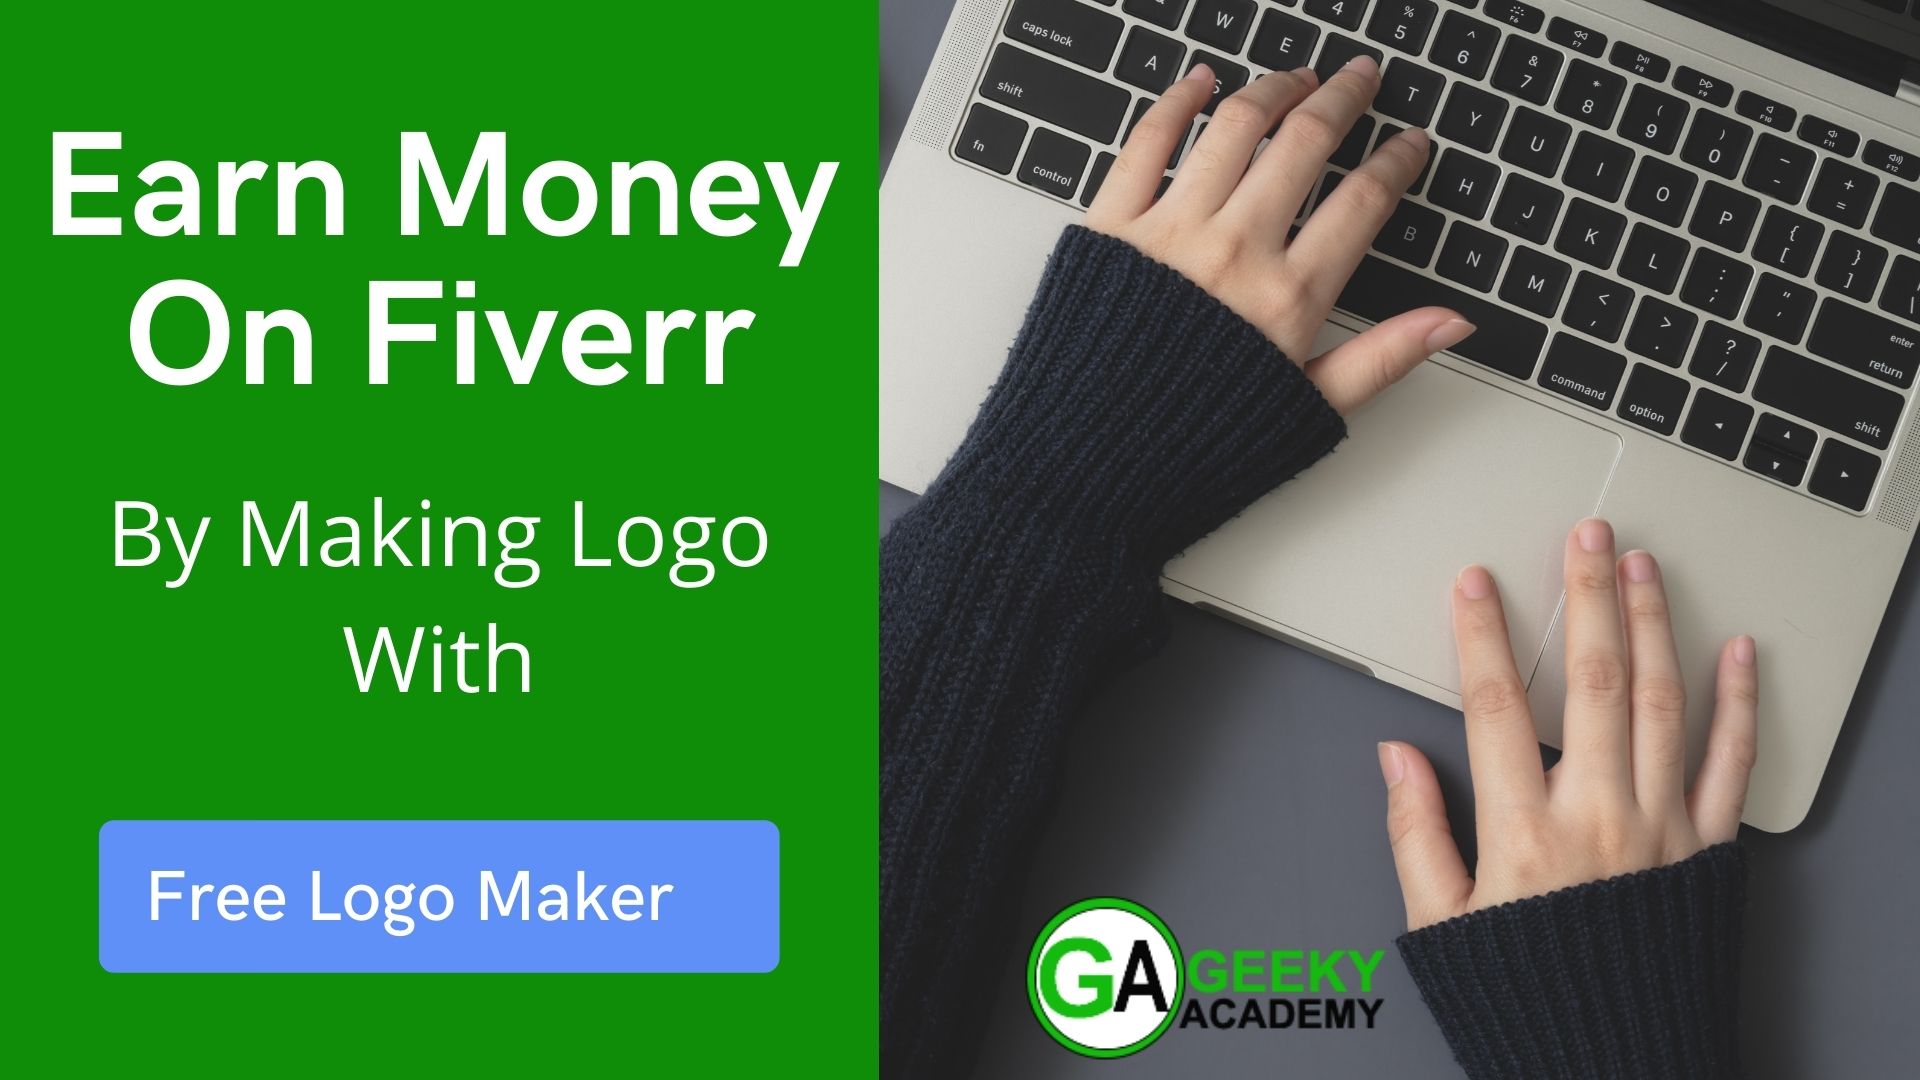 Earn Money On Fiverr By Making Logo With Free Logo Maker